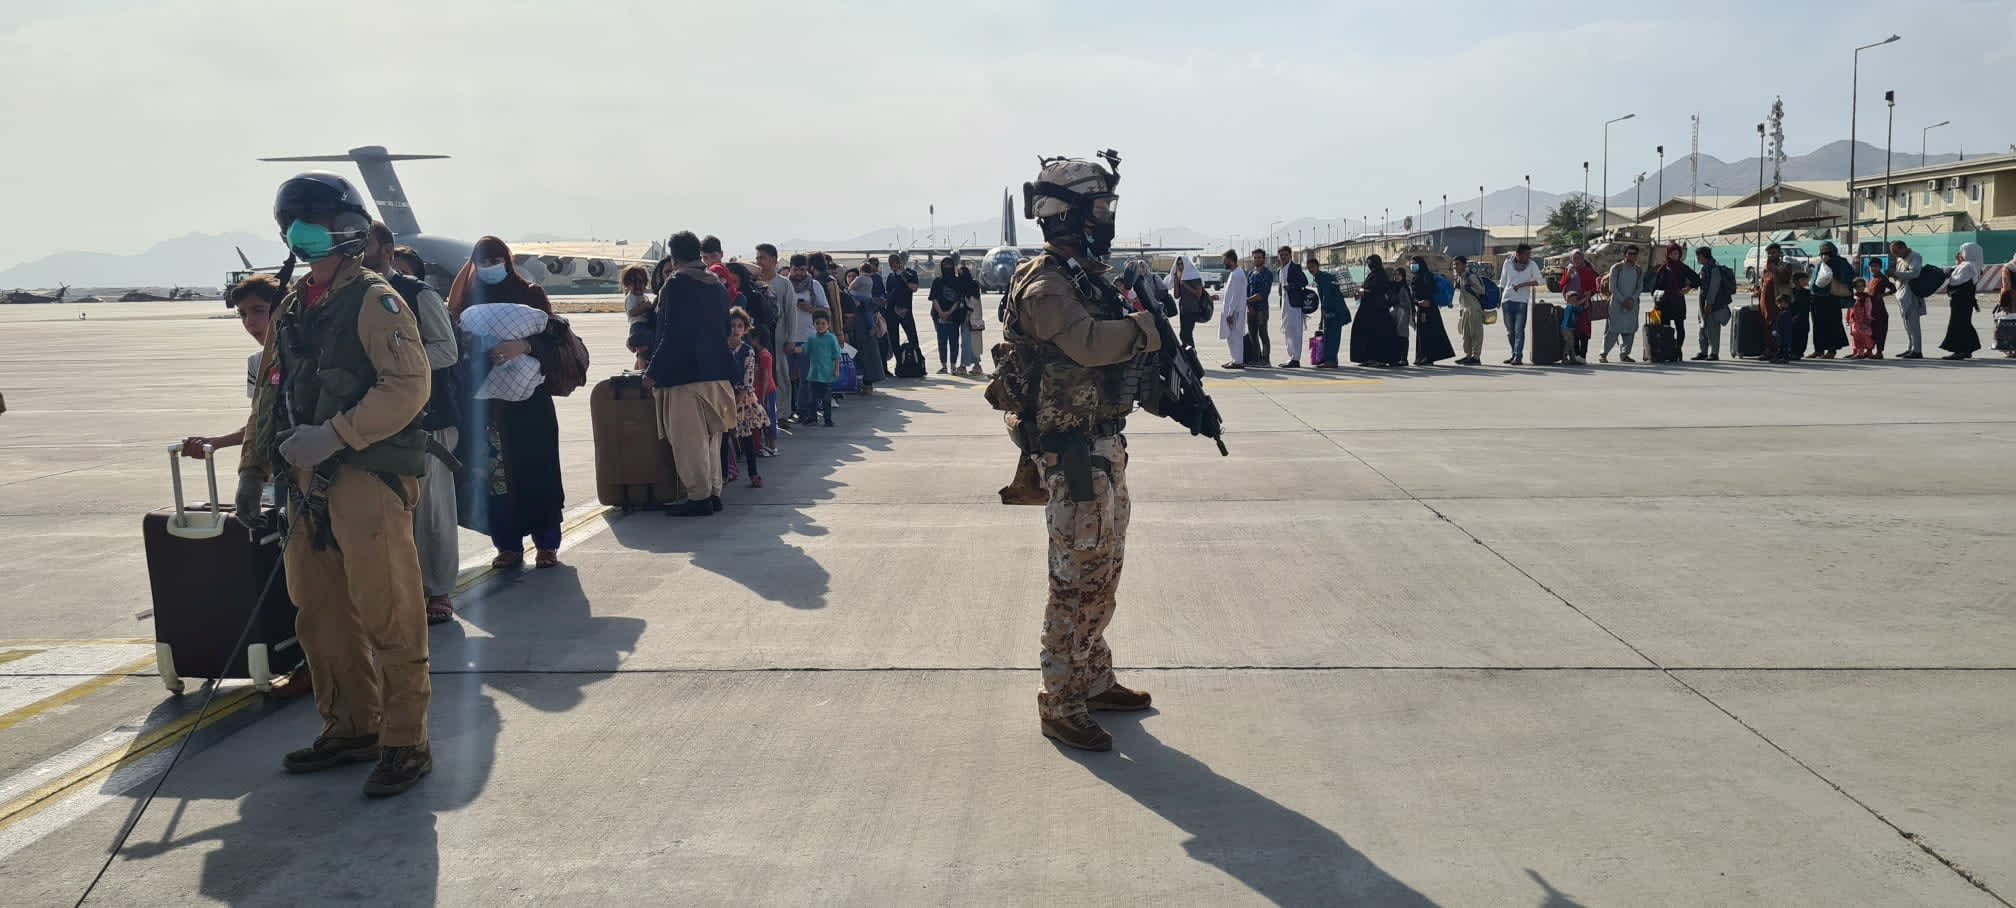 Deadly firefight erupts at Kabul airport as evacuation chaos continues